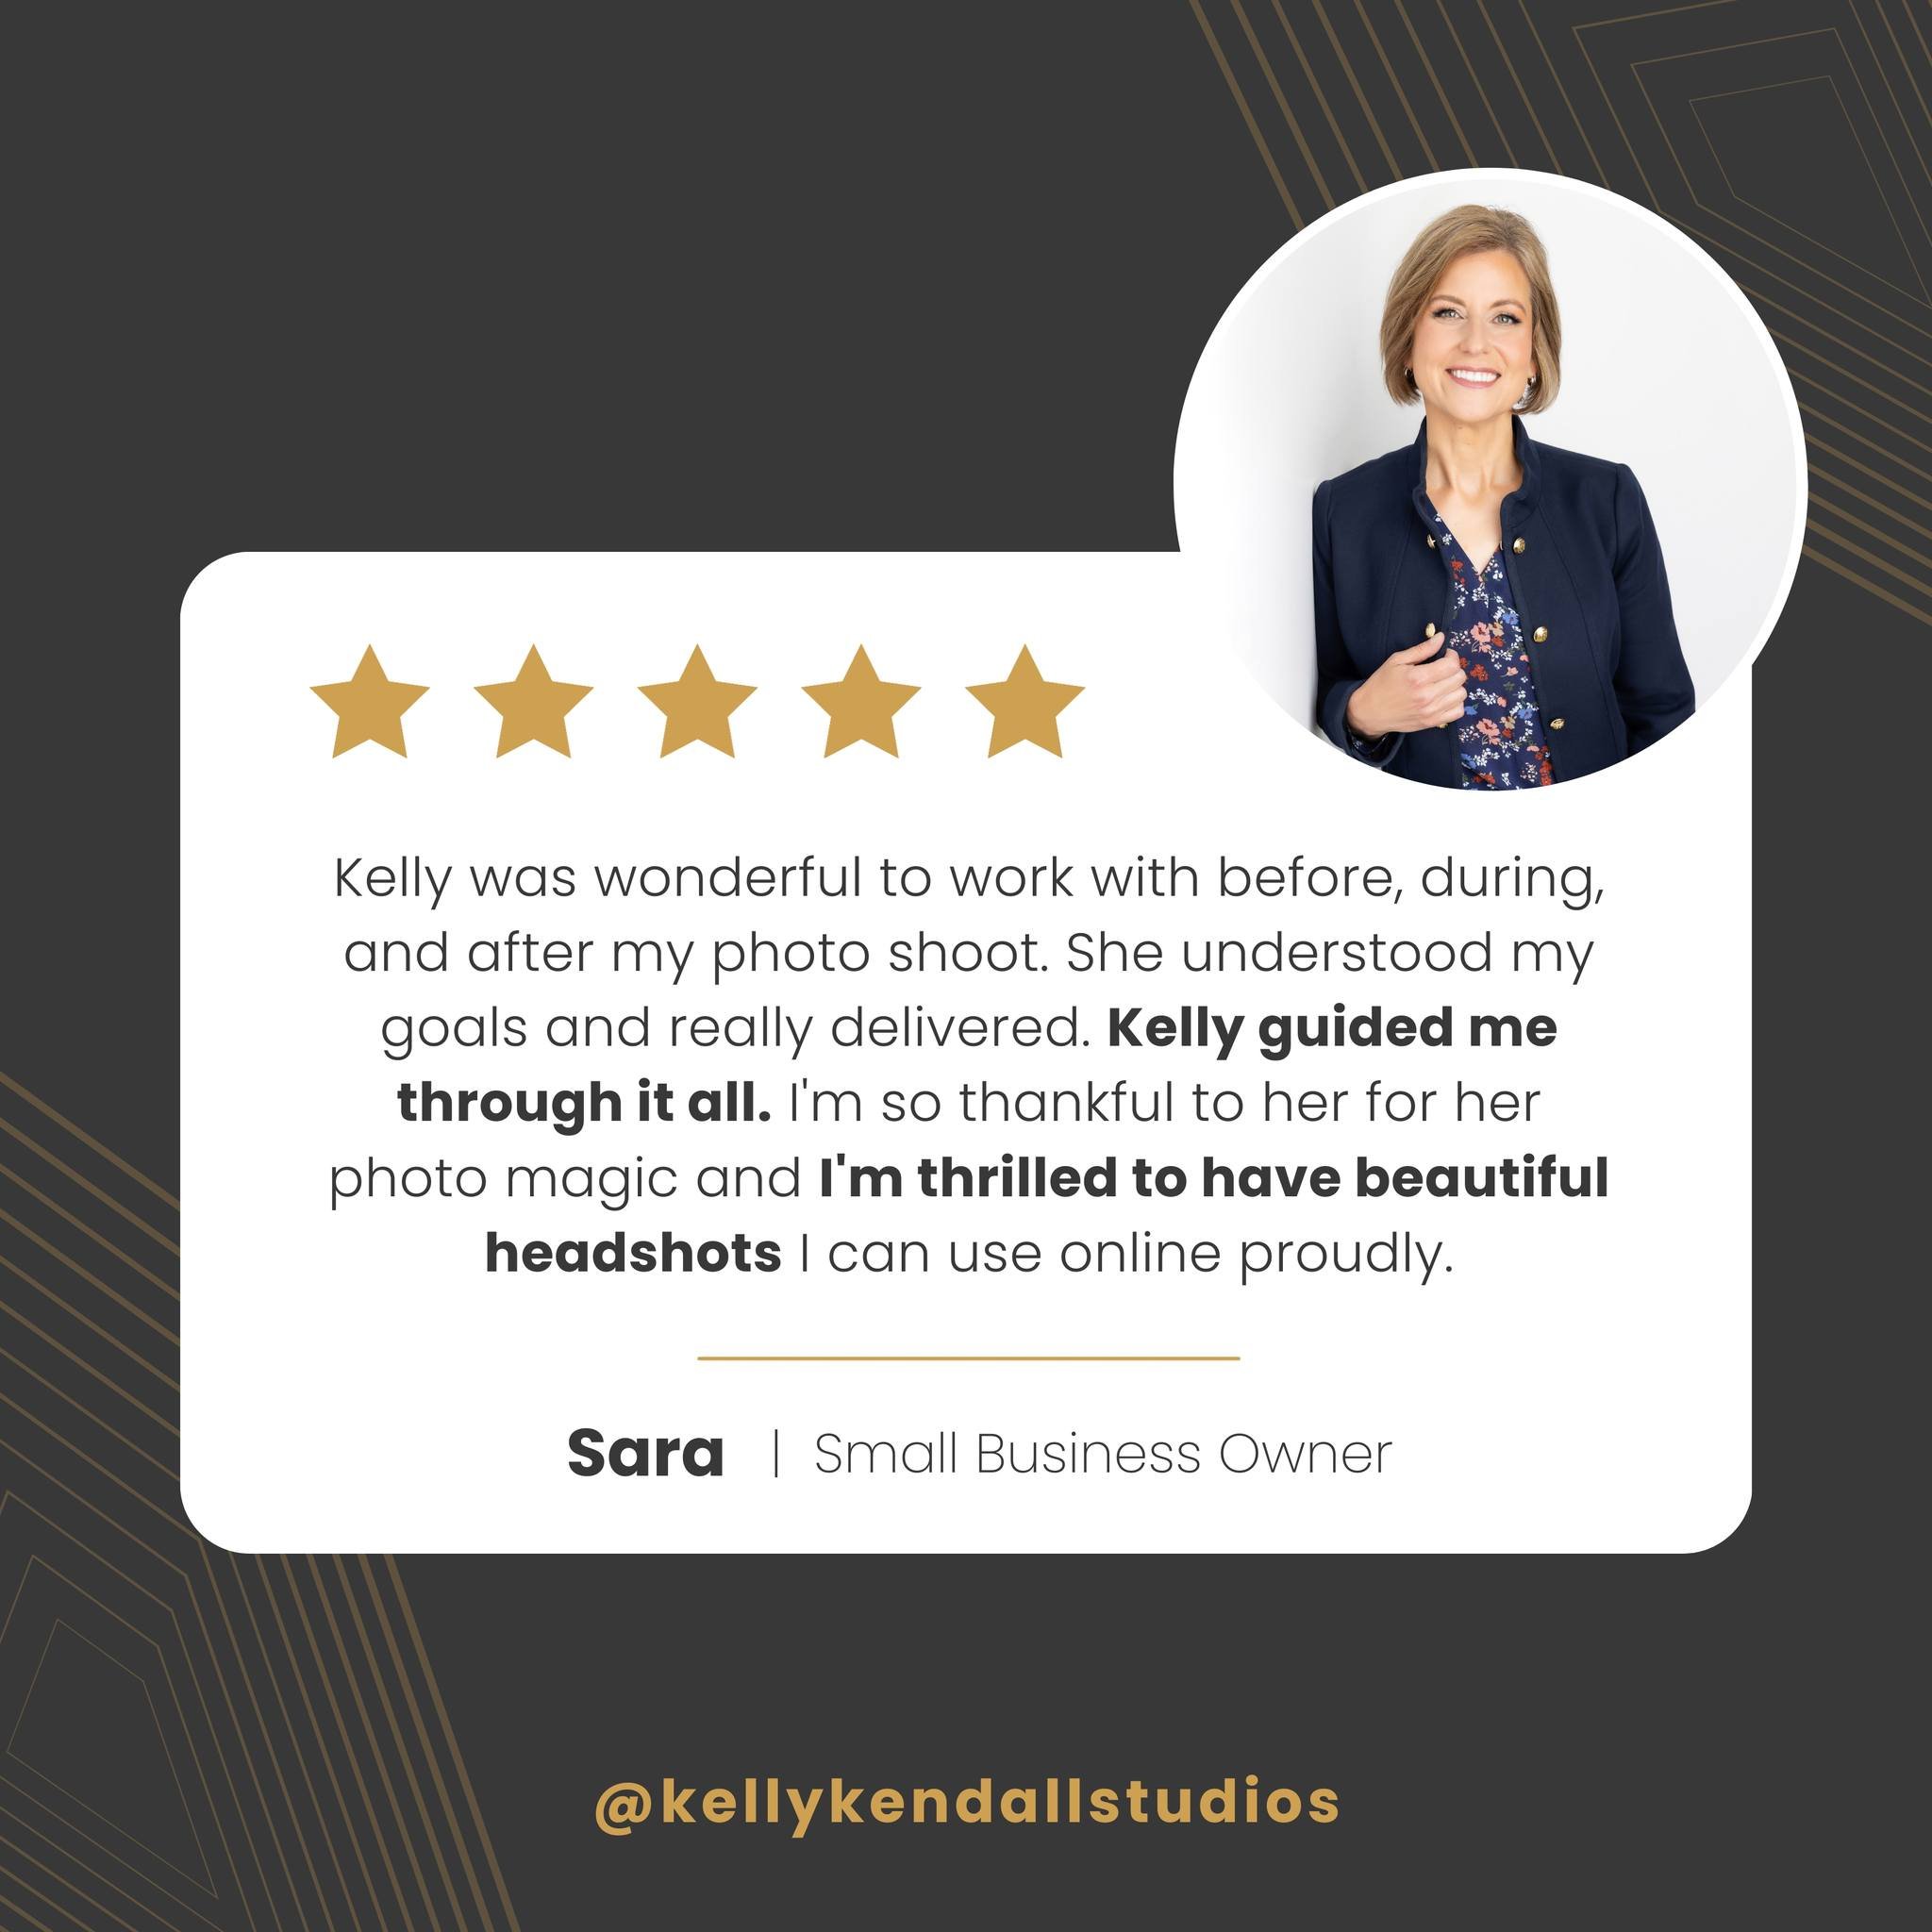 &quot;Kelly was wonderful to work with before, during, and after my photo shoot. She understood my goals and really delivered. 

Kelly guided me through it all. I'm so thankful to her for her photo magic and I'm thrilled to have beautiful headshots I